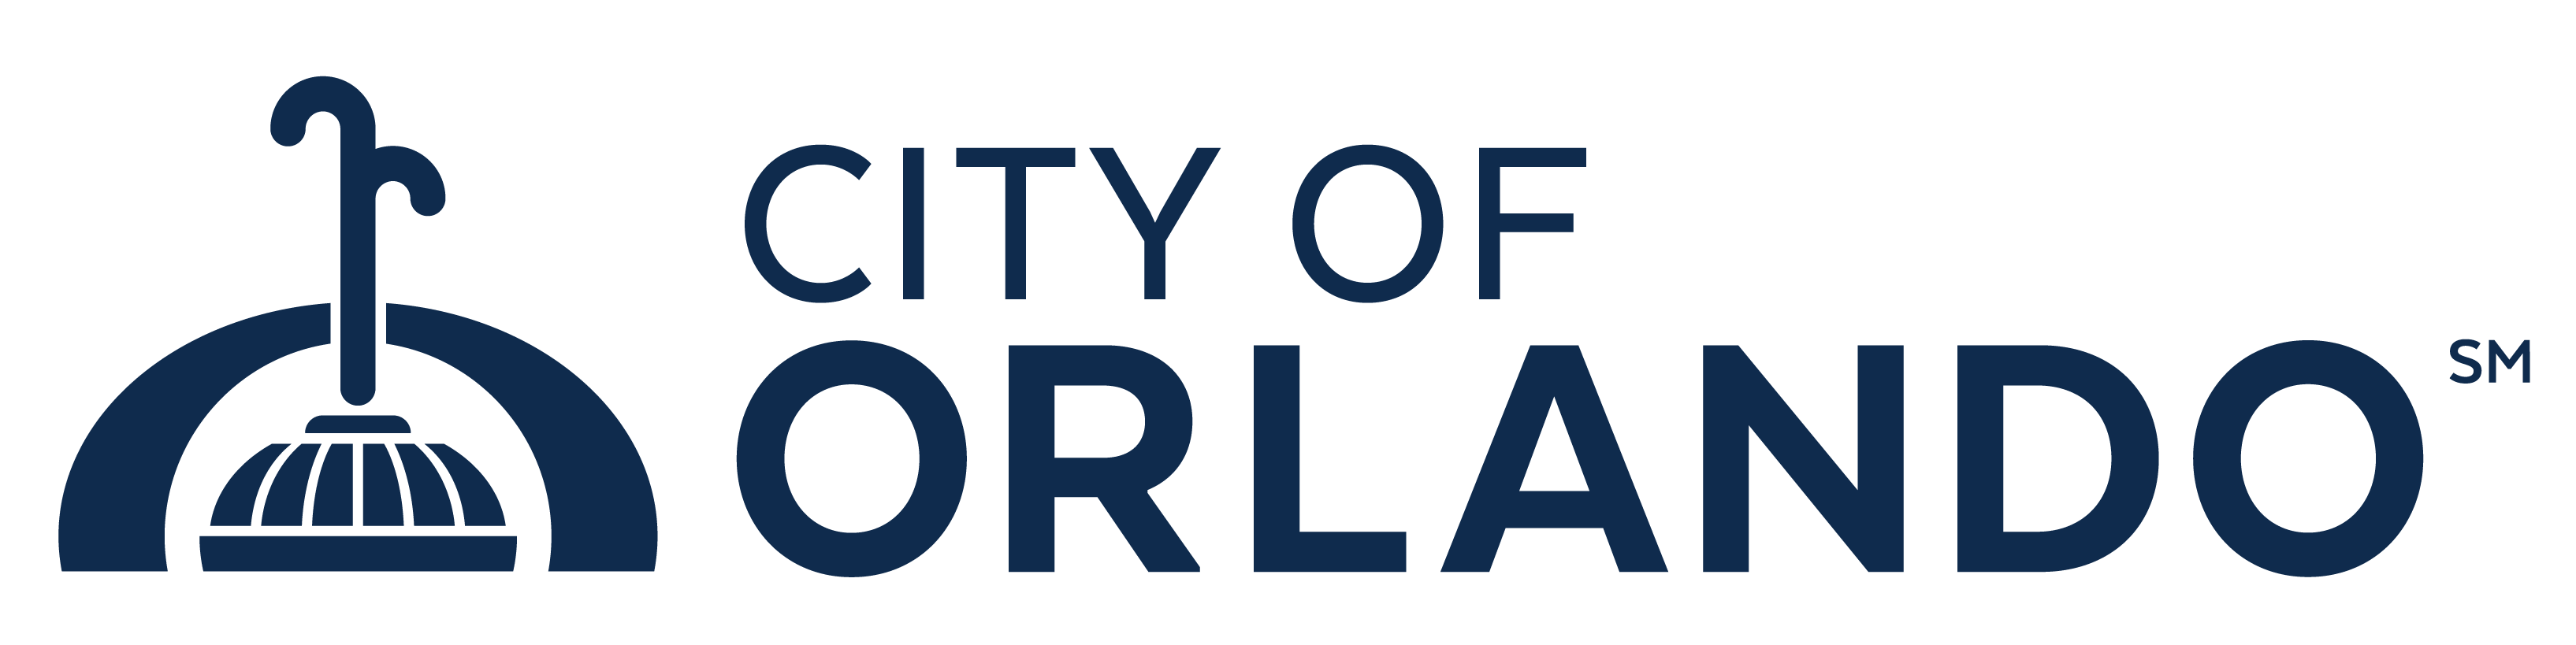 City Hall Logo - City of Orlando | The official website of the City Beautiful